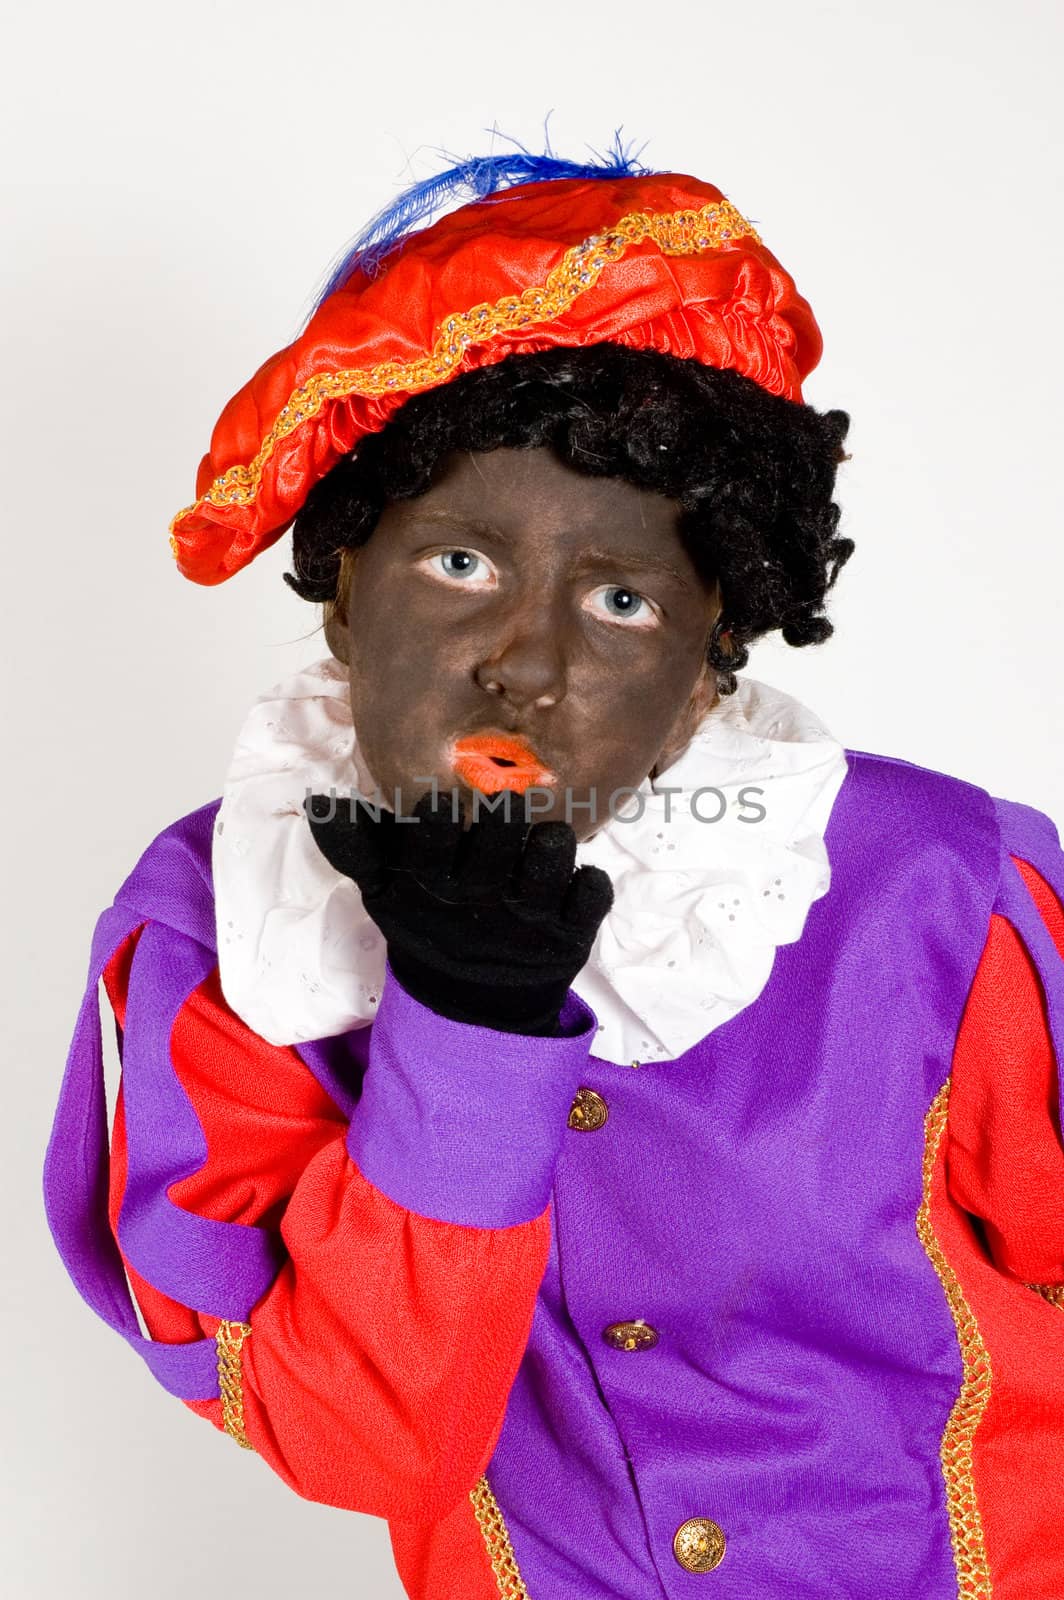 girl dressed up as zwarte piet blowing a handkiss by ladyminnie